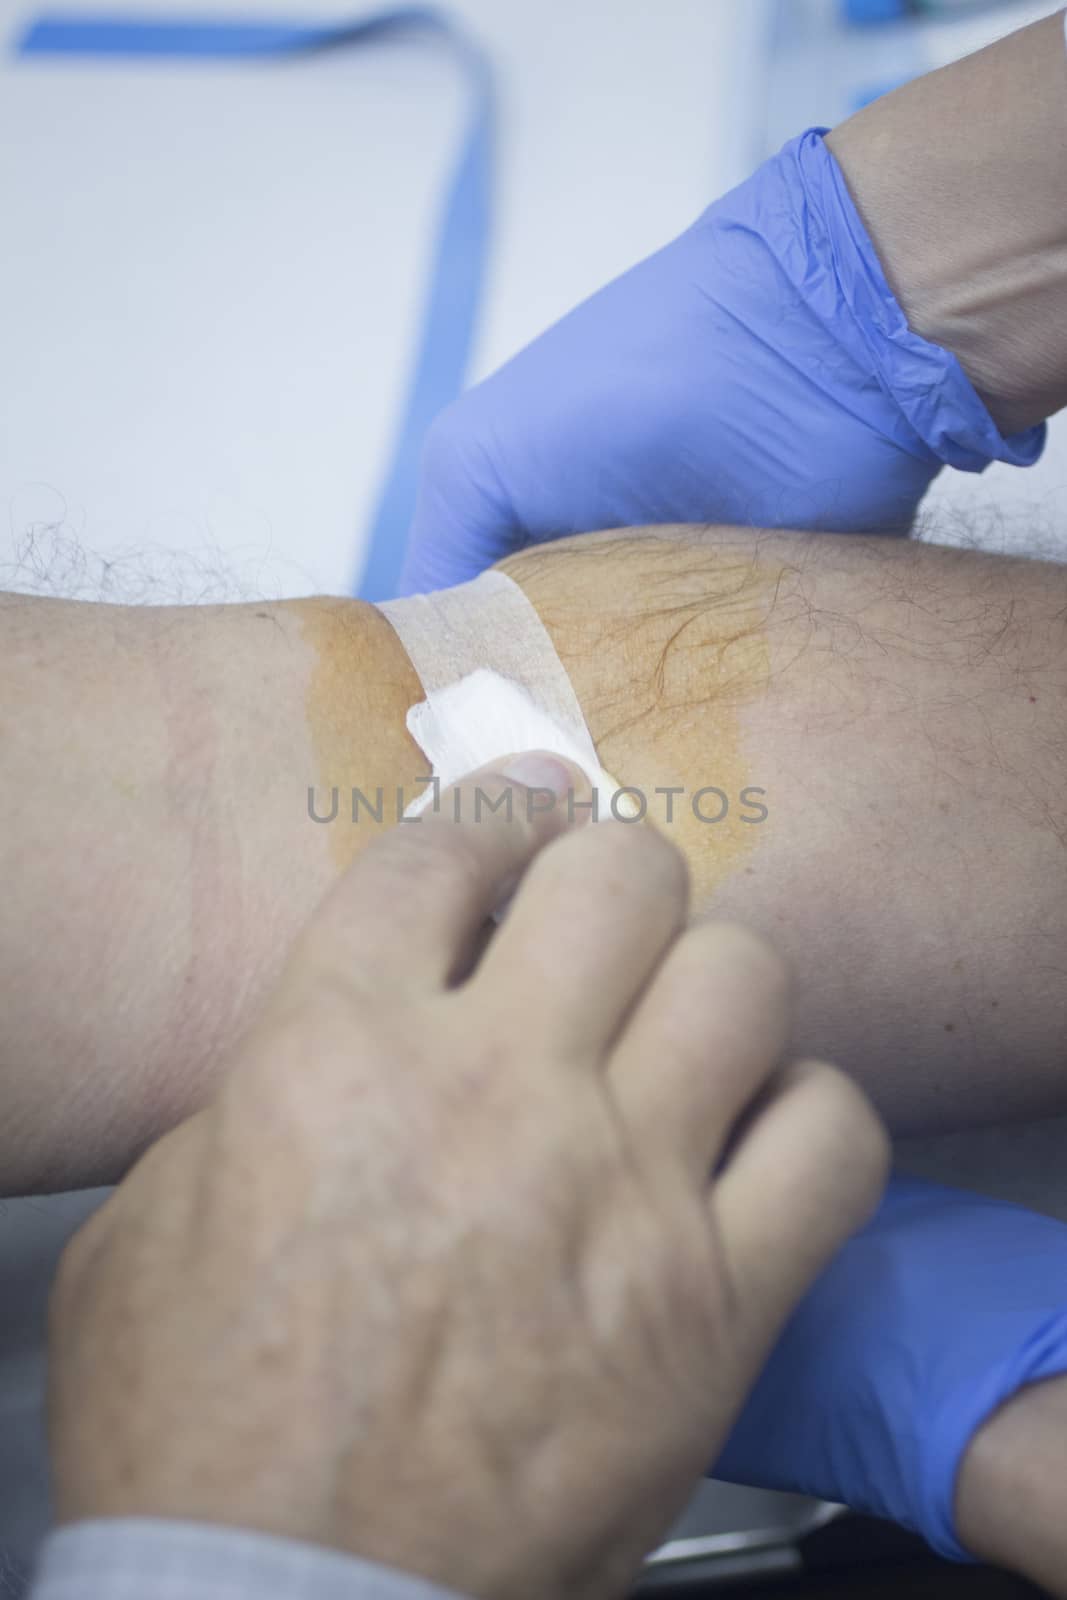 Nurse and male patient blood sample donation by edwardolive